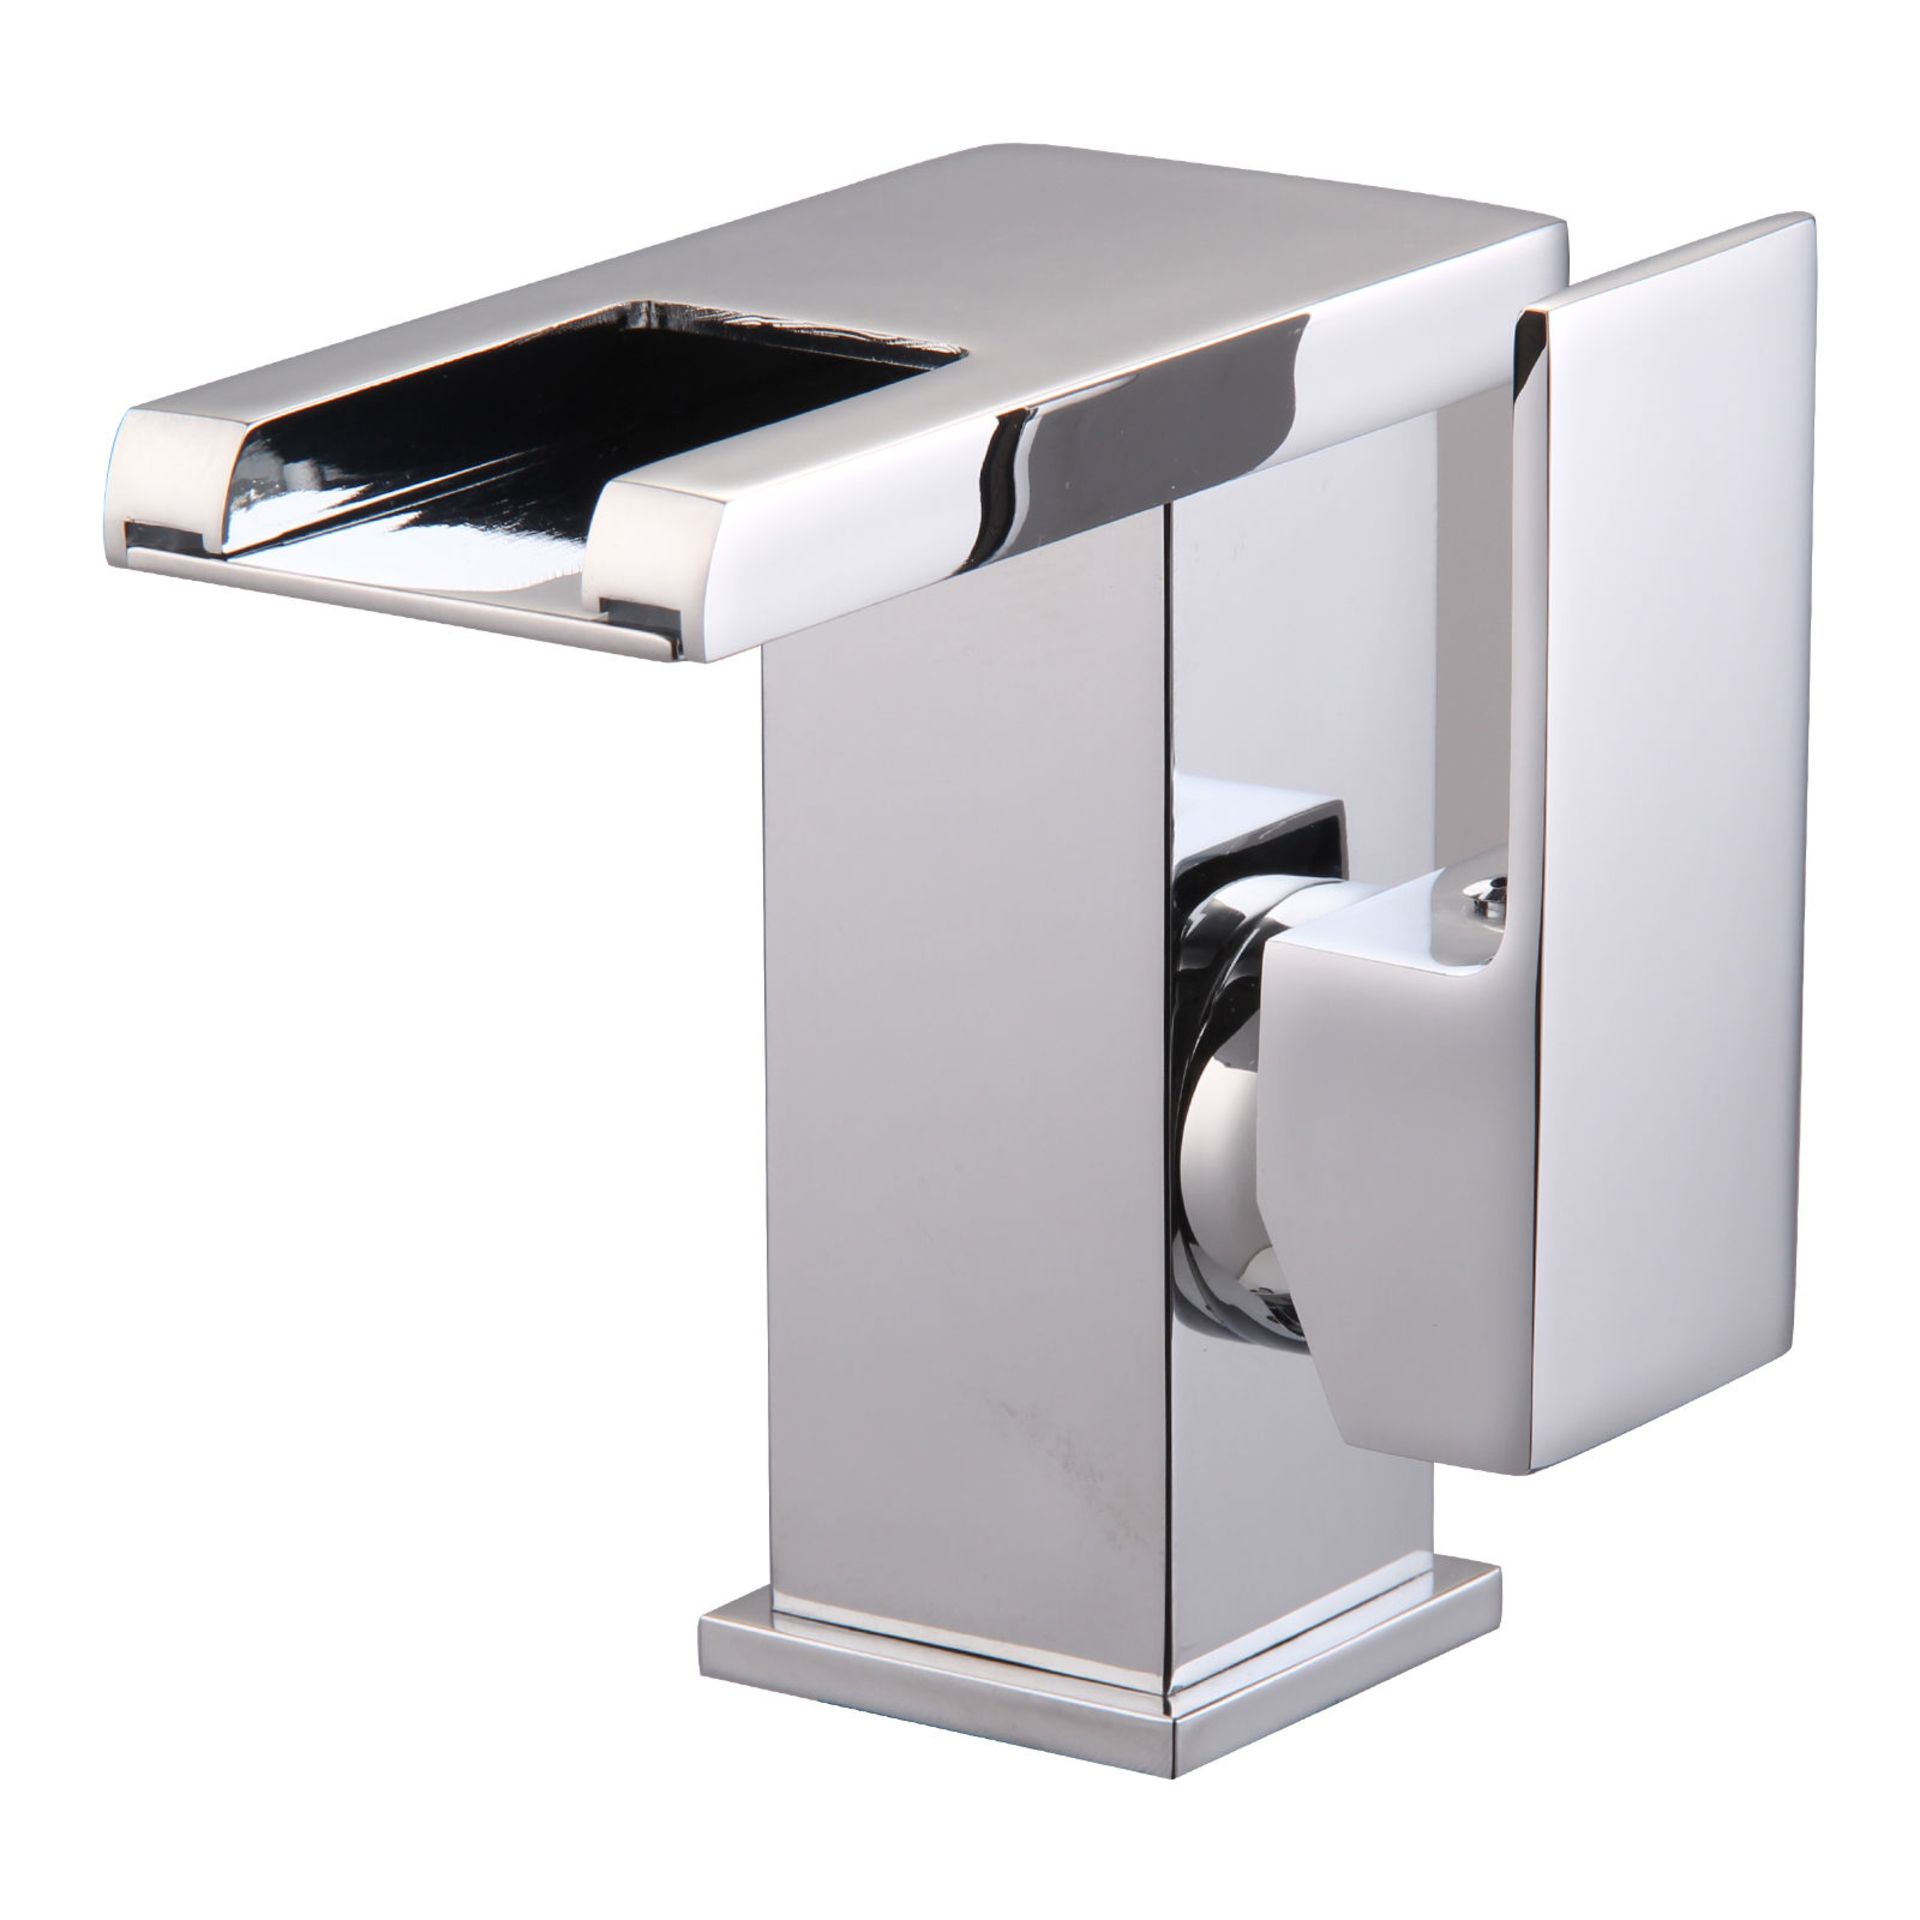 New & Boxed LED Waterfall Bathroom Basin Mixer Tap. RRP £229.99. Easy to install and clean. All - Image 2 of 2